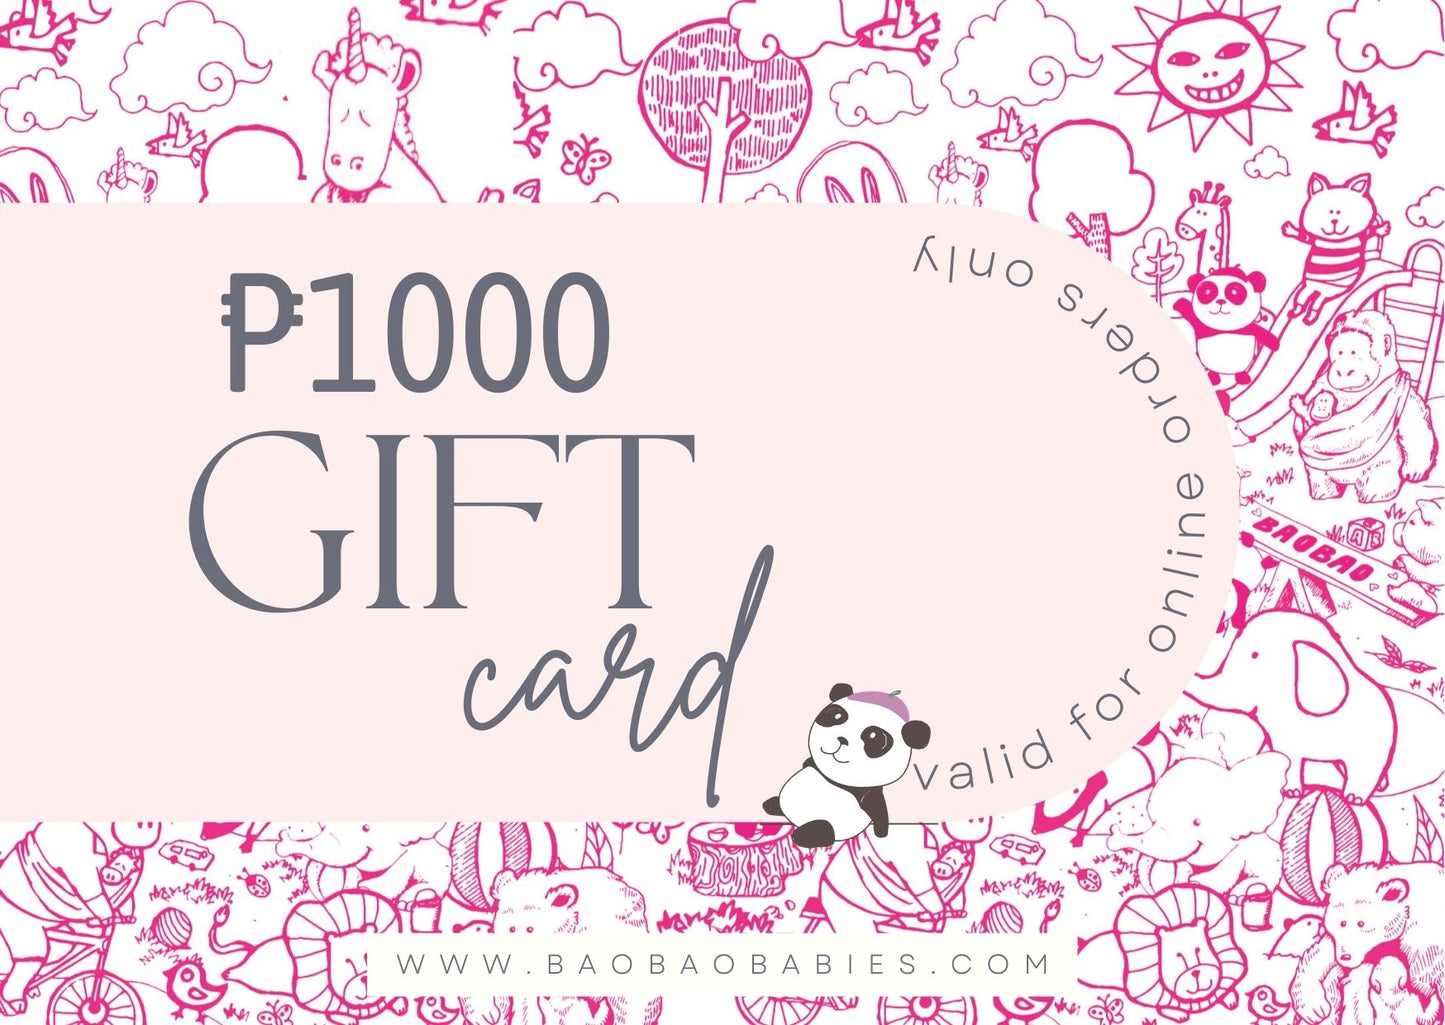 BaoBao Babies E-Gift Card ( Cannot be used at our brick and mortar stores )